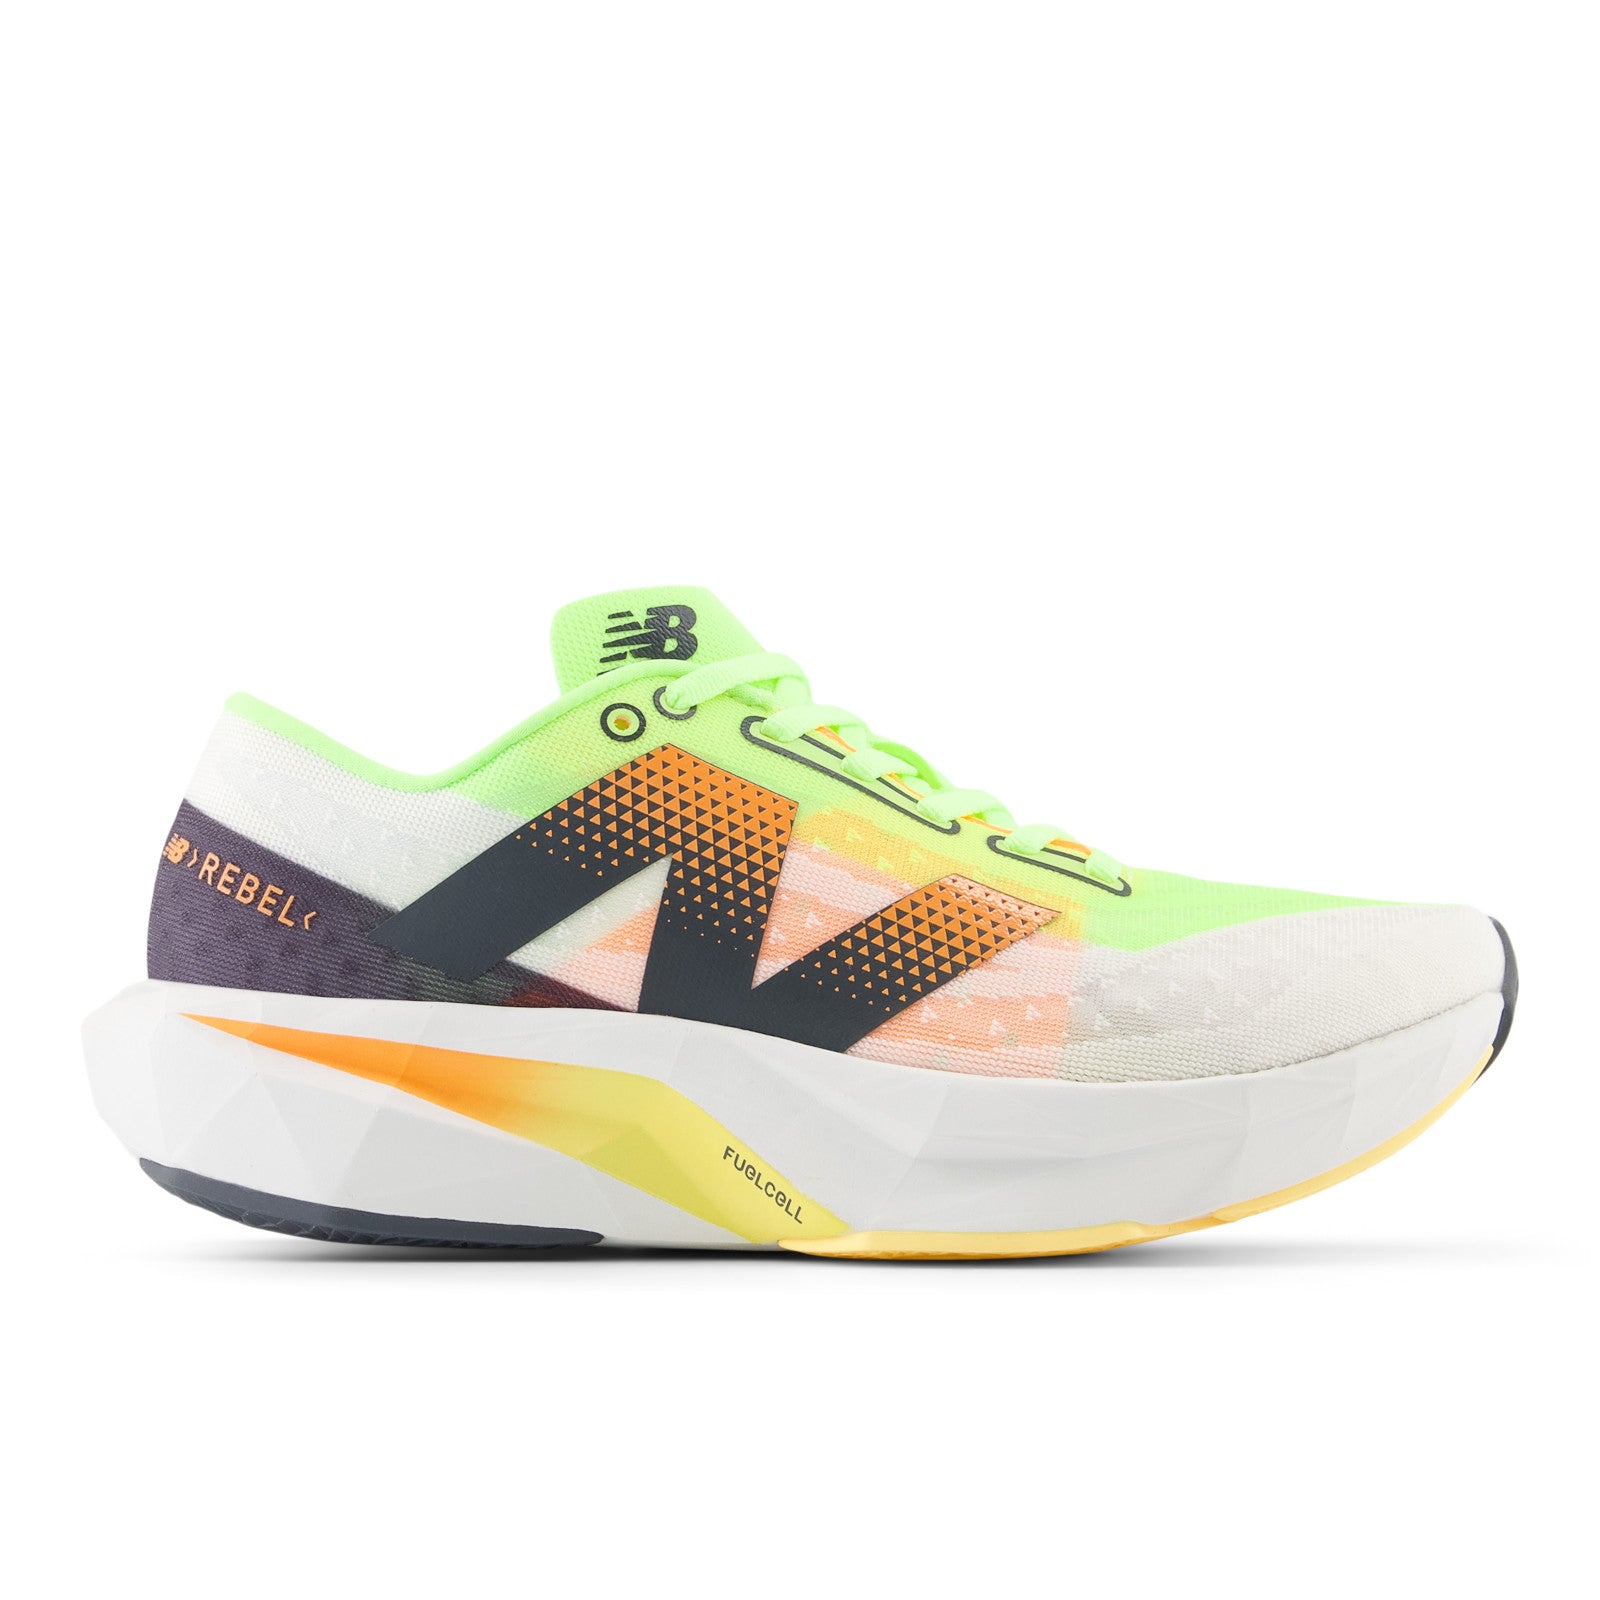 NEW BALANCE WOMEN'S FUELCELL REBEL V4 - B - LA4 WHITE/BLEACHED LIME GLO 5.0